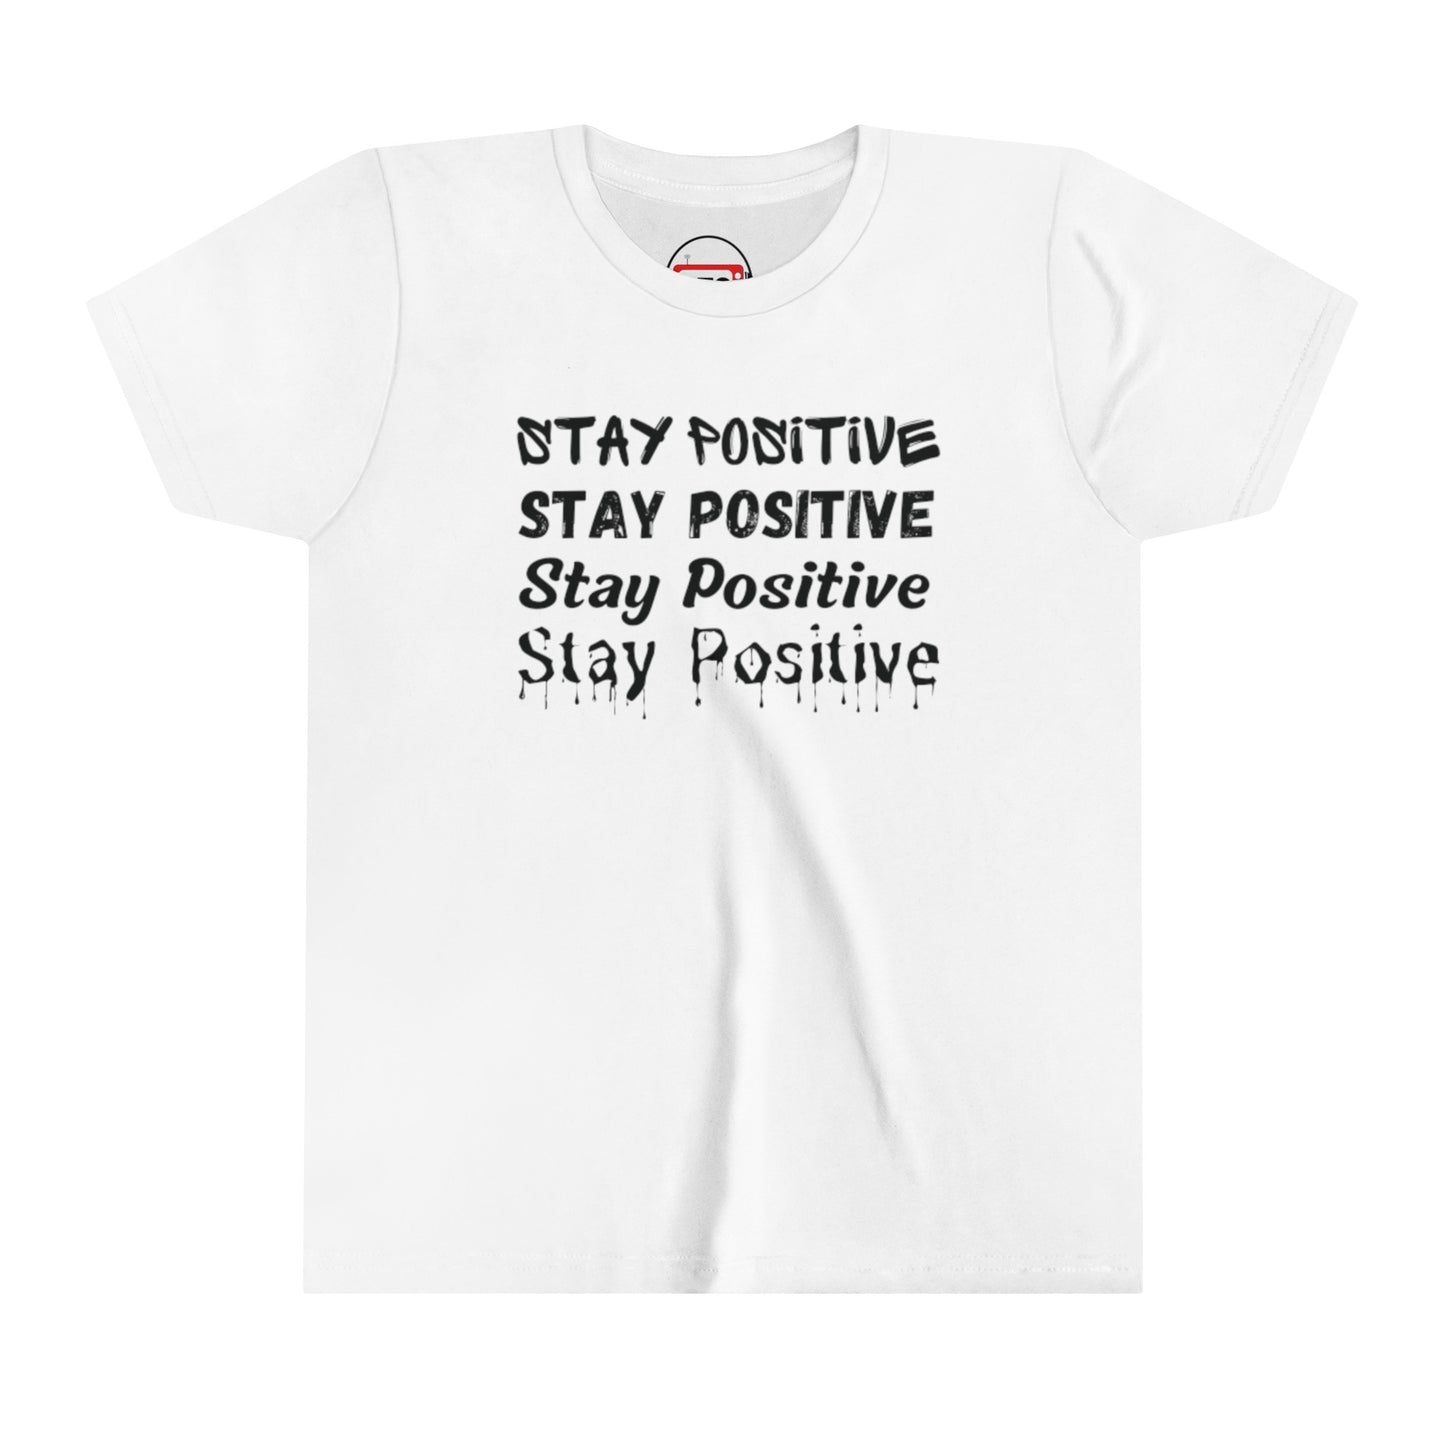 Stay Positive Youth Short Sleeve Tee Black Drip